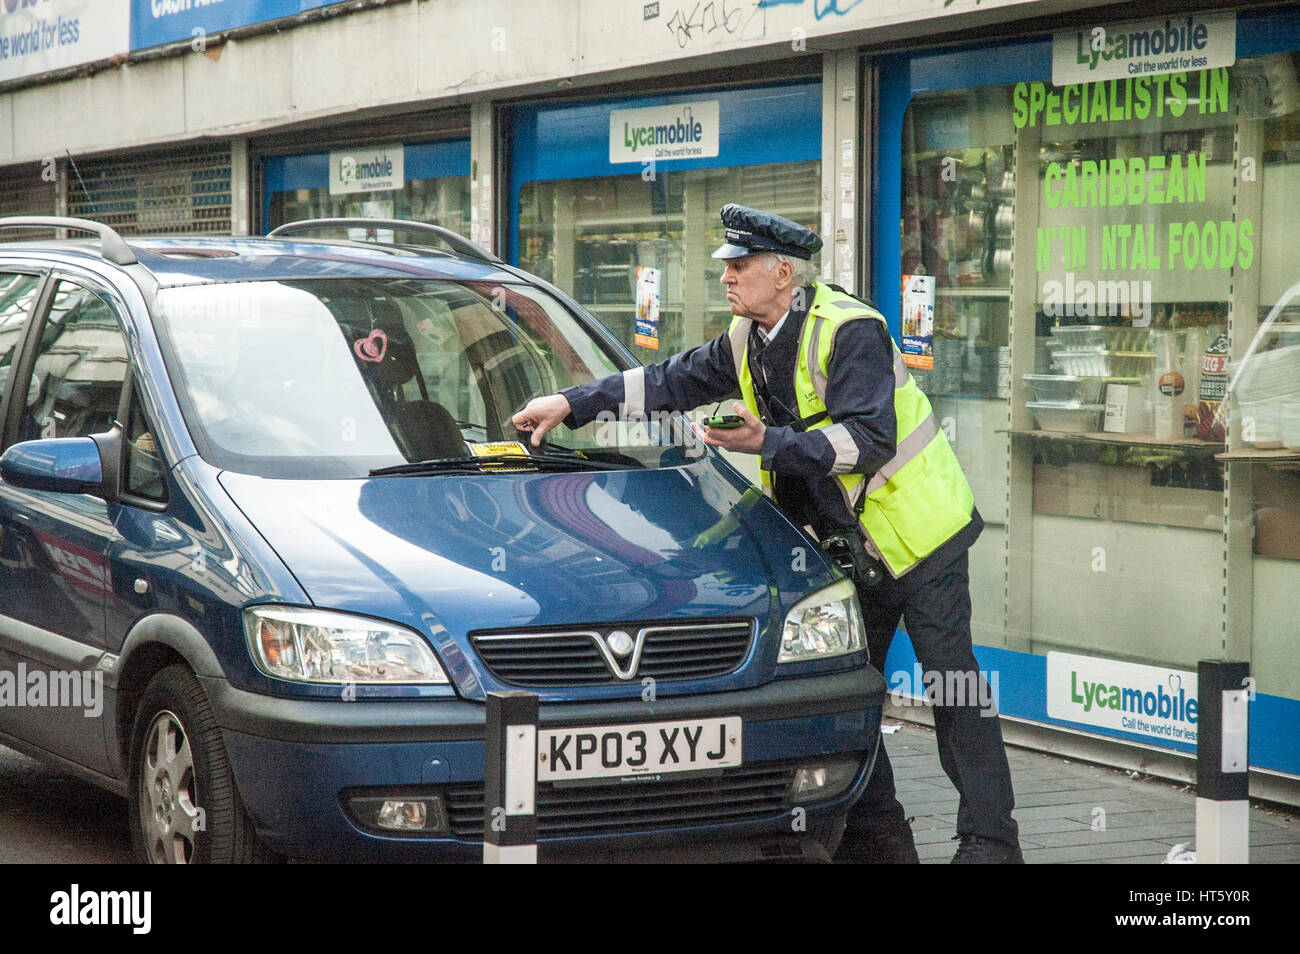 London, UK, 07/03/2017, Traffic warden attaching a parking ticket to a car at Brixton market. Stock Photo